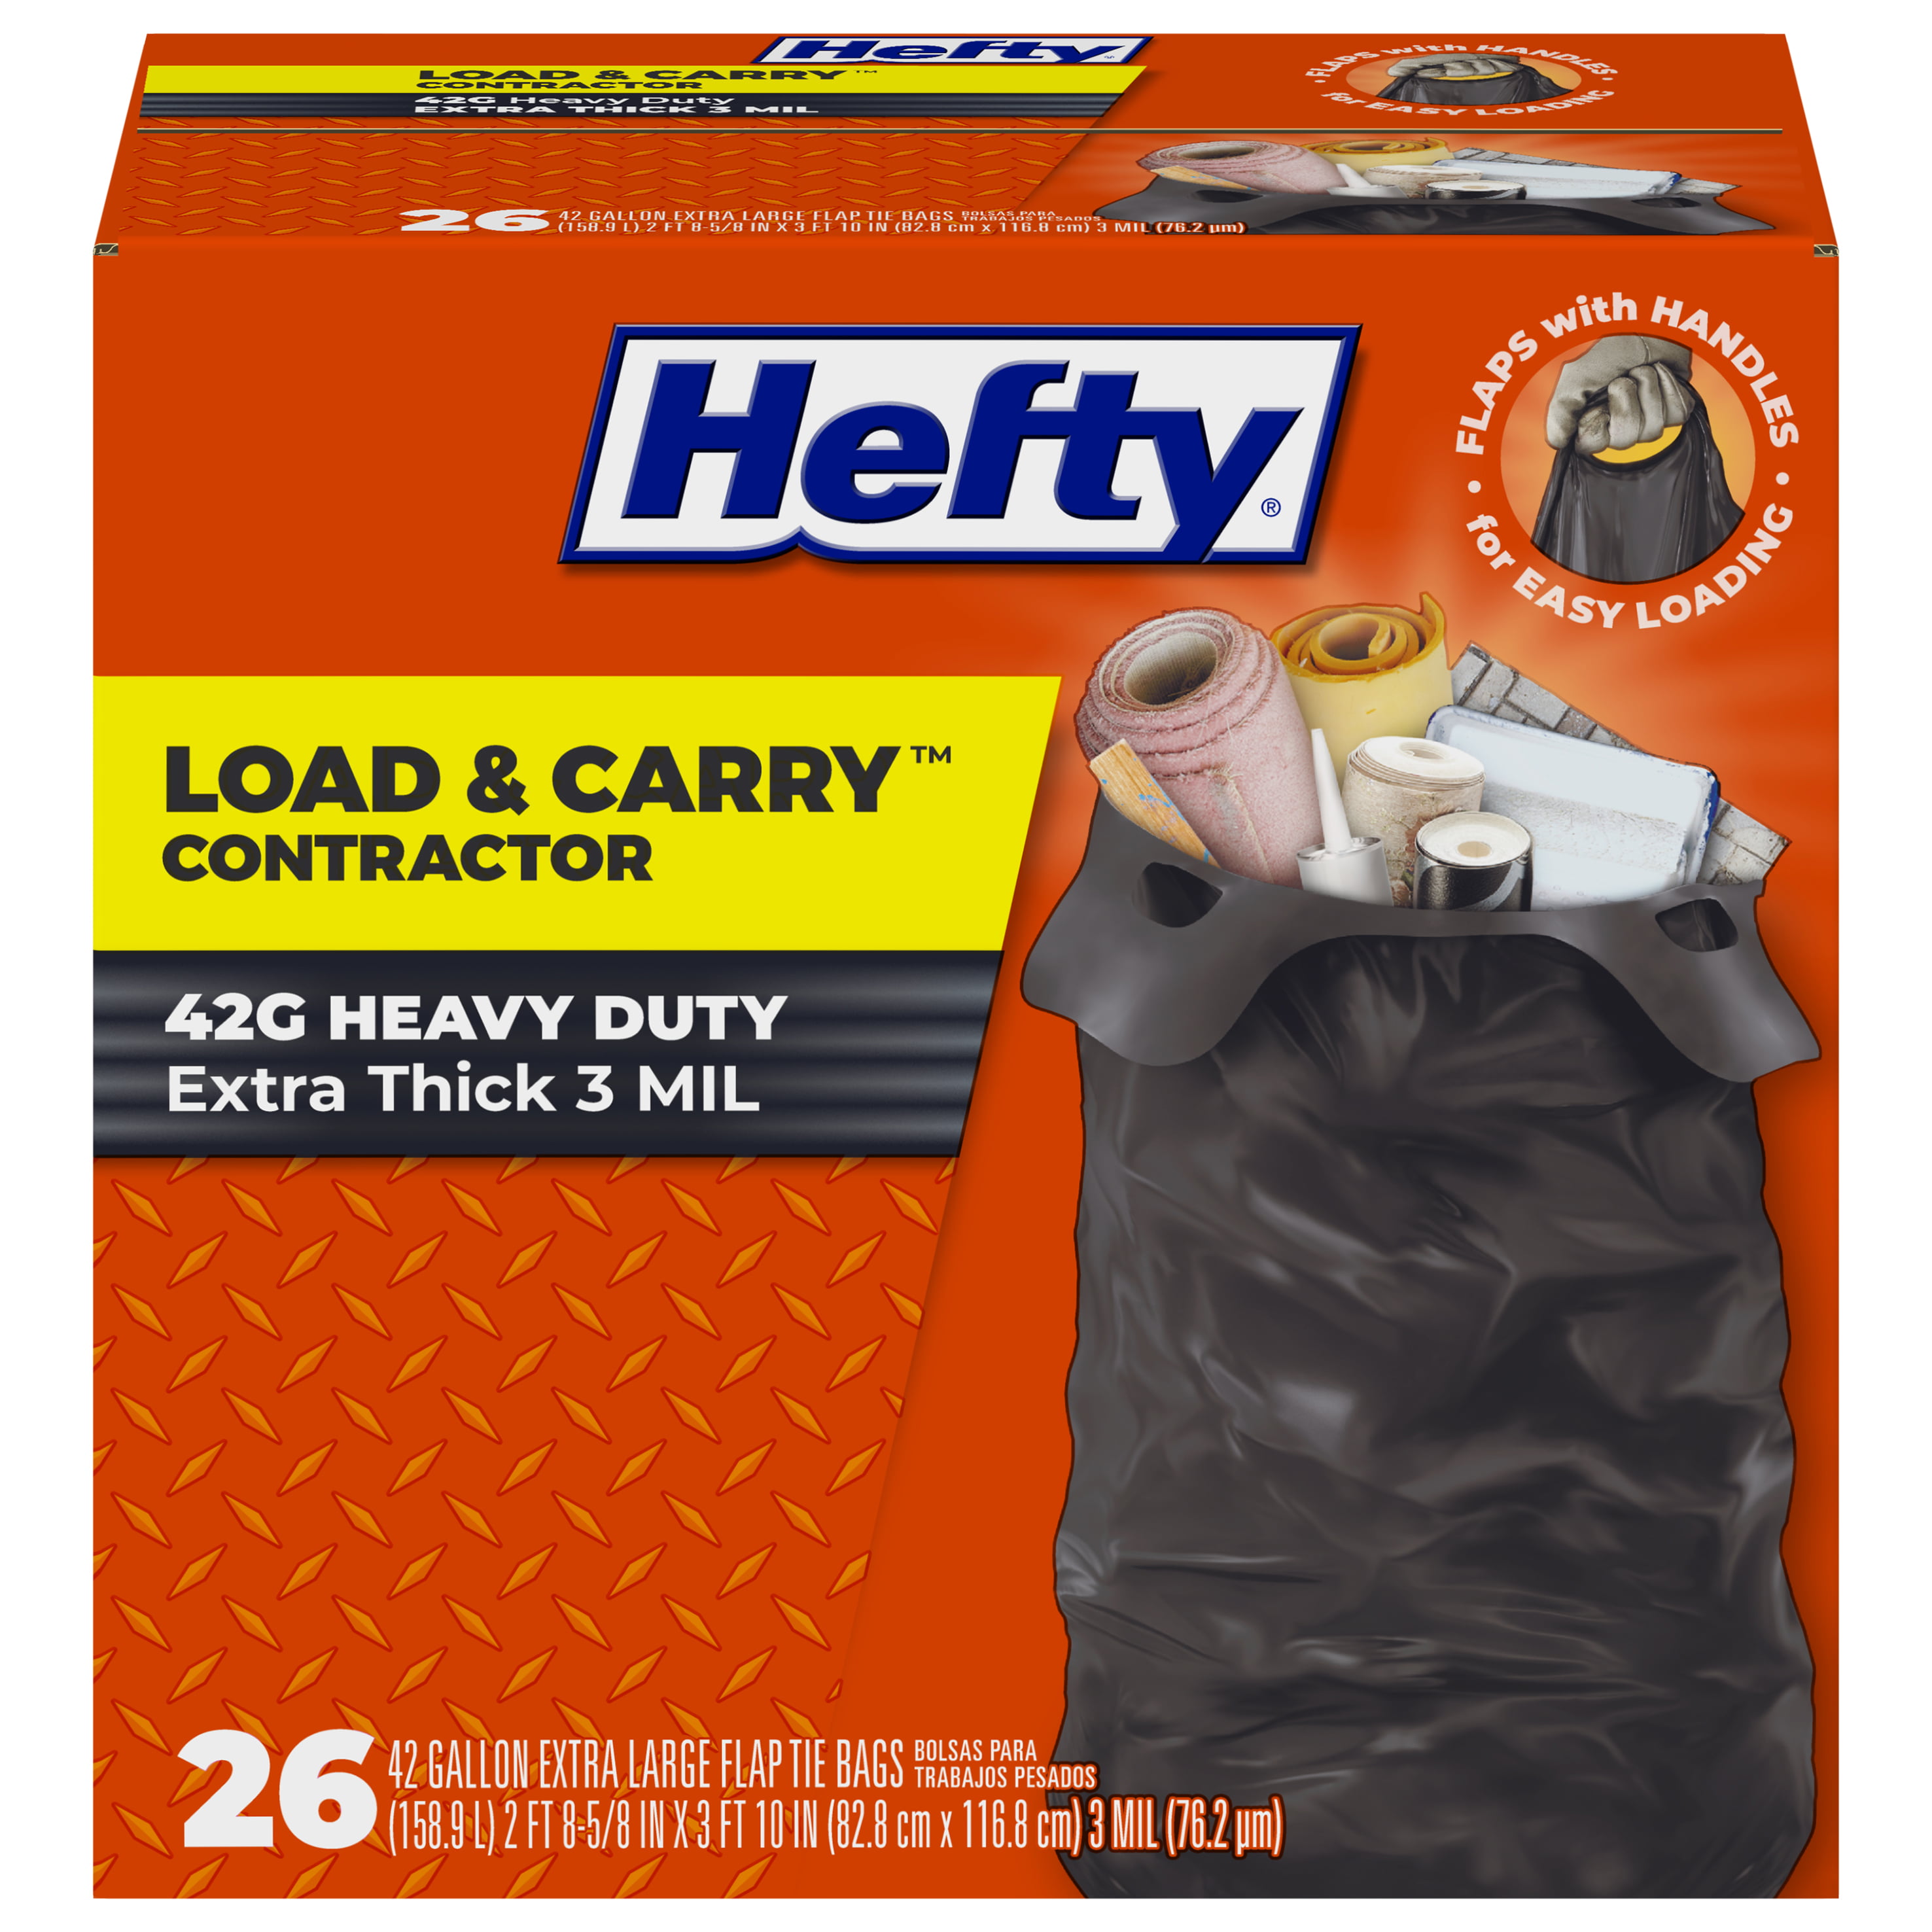 Odyn 42 Gallon Contractor Clean Up Bags